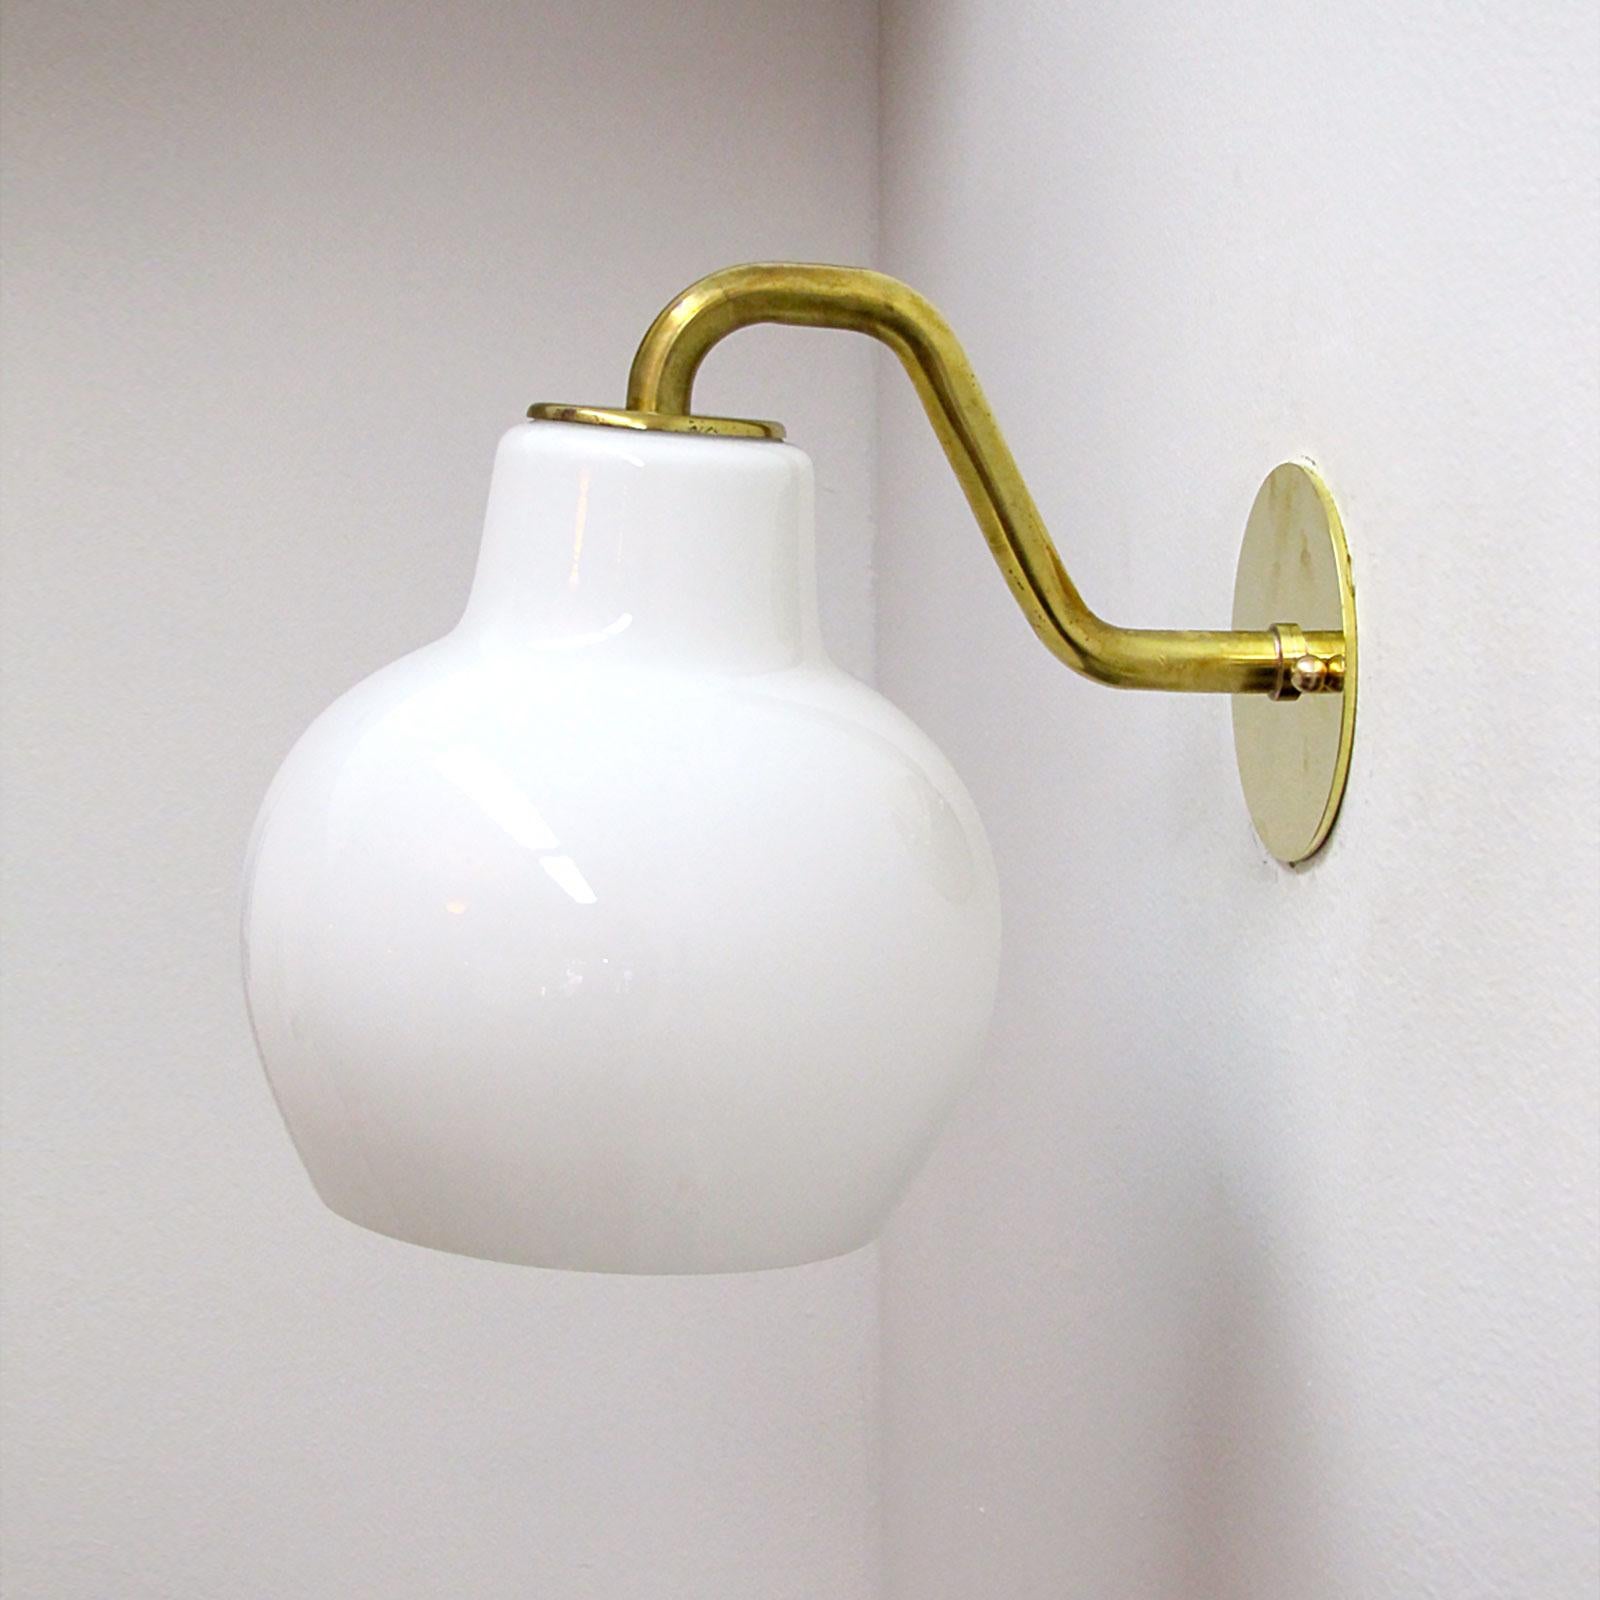 Elegant early pair of wall lights by Vilhelm Lauritzen for Louis Poulsen, with opaline glass shade on brass hardware, wired for US standards, one E27 socket per fixture, max. wattage 75w, bulbs provided as a one time courtesy.